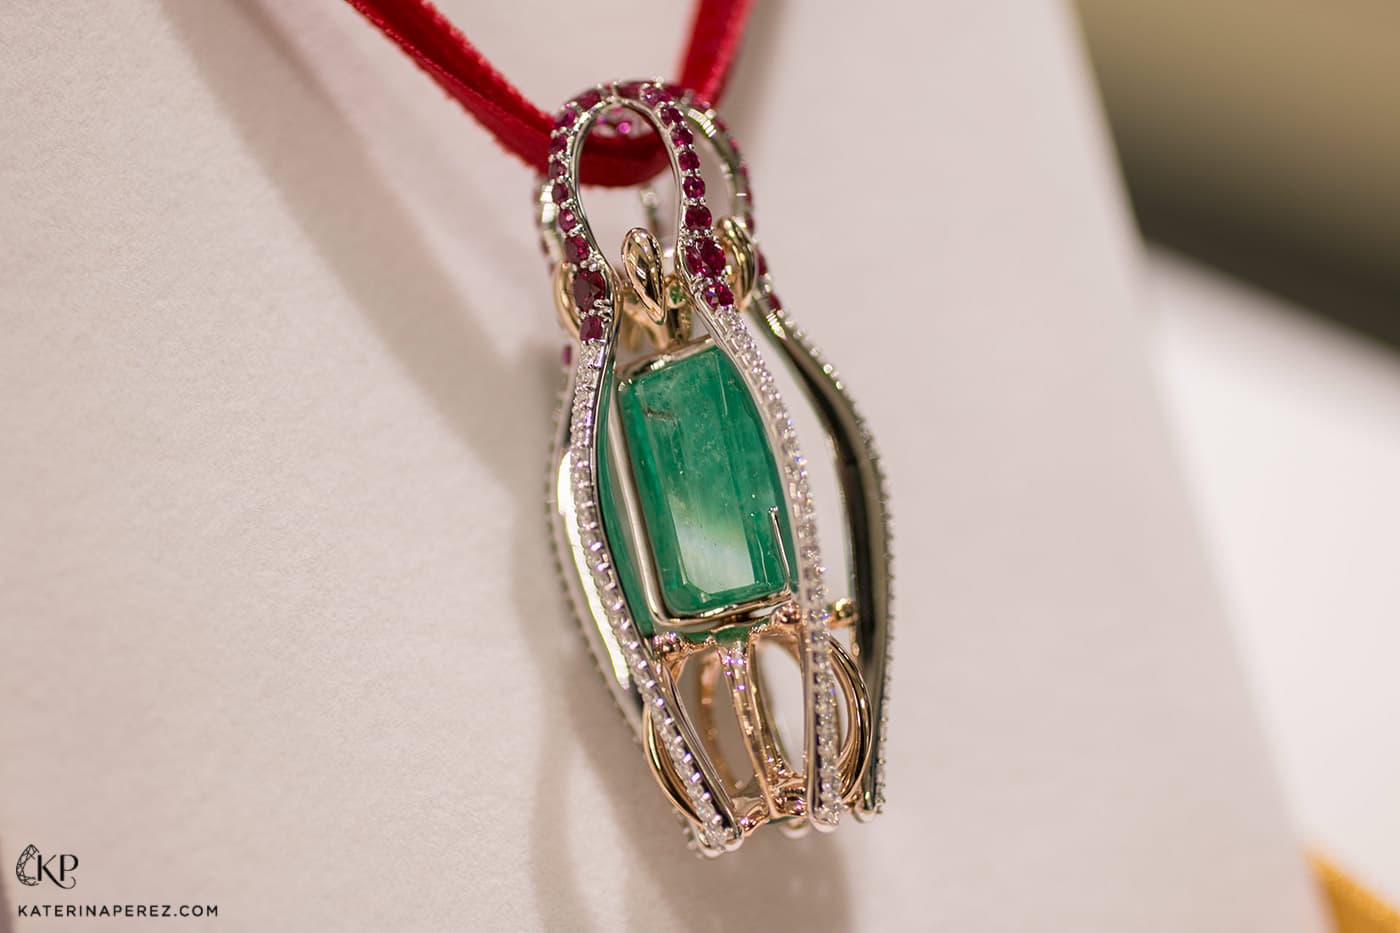 Sergey Korolyov's 'Symbols of Russia' pendant from Ringo's 'Matrena de Ural' collection with 18.04 carat Ural Mountain emerald, rubies and diamonds in white and rose gold